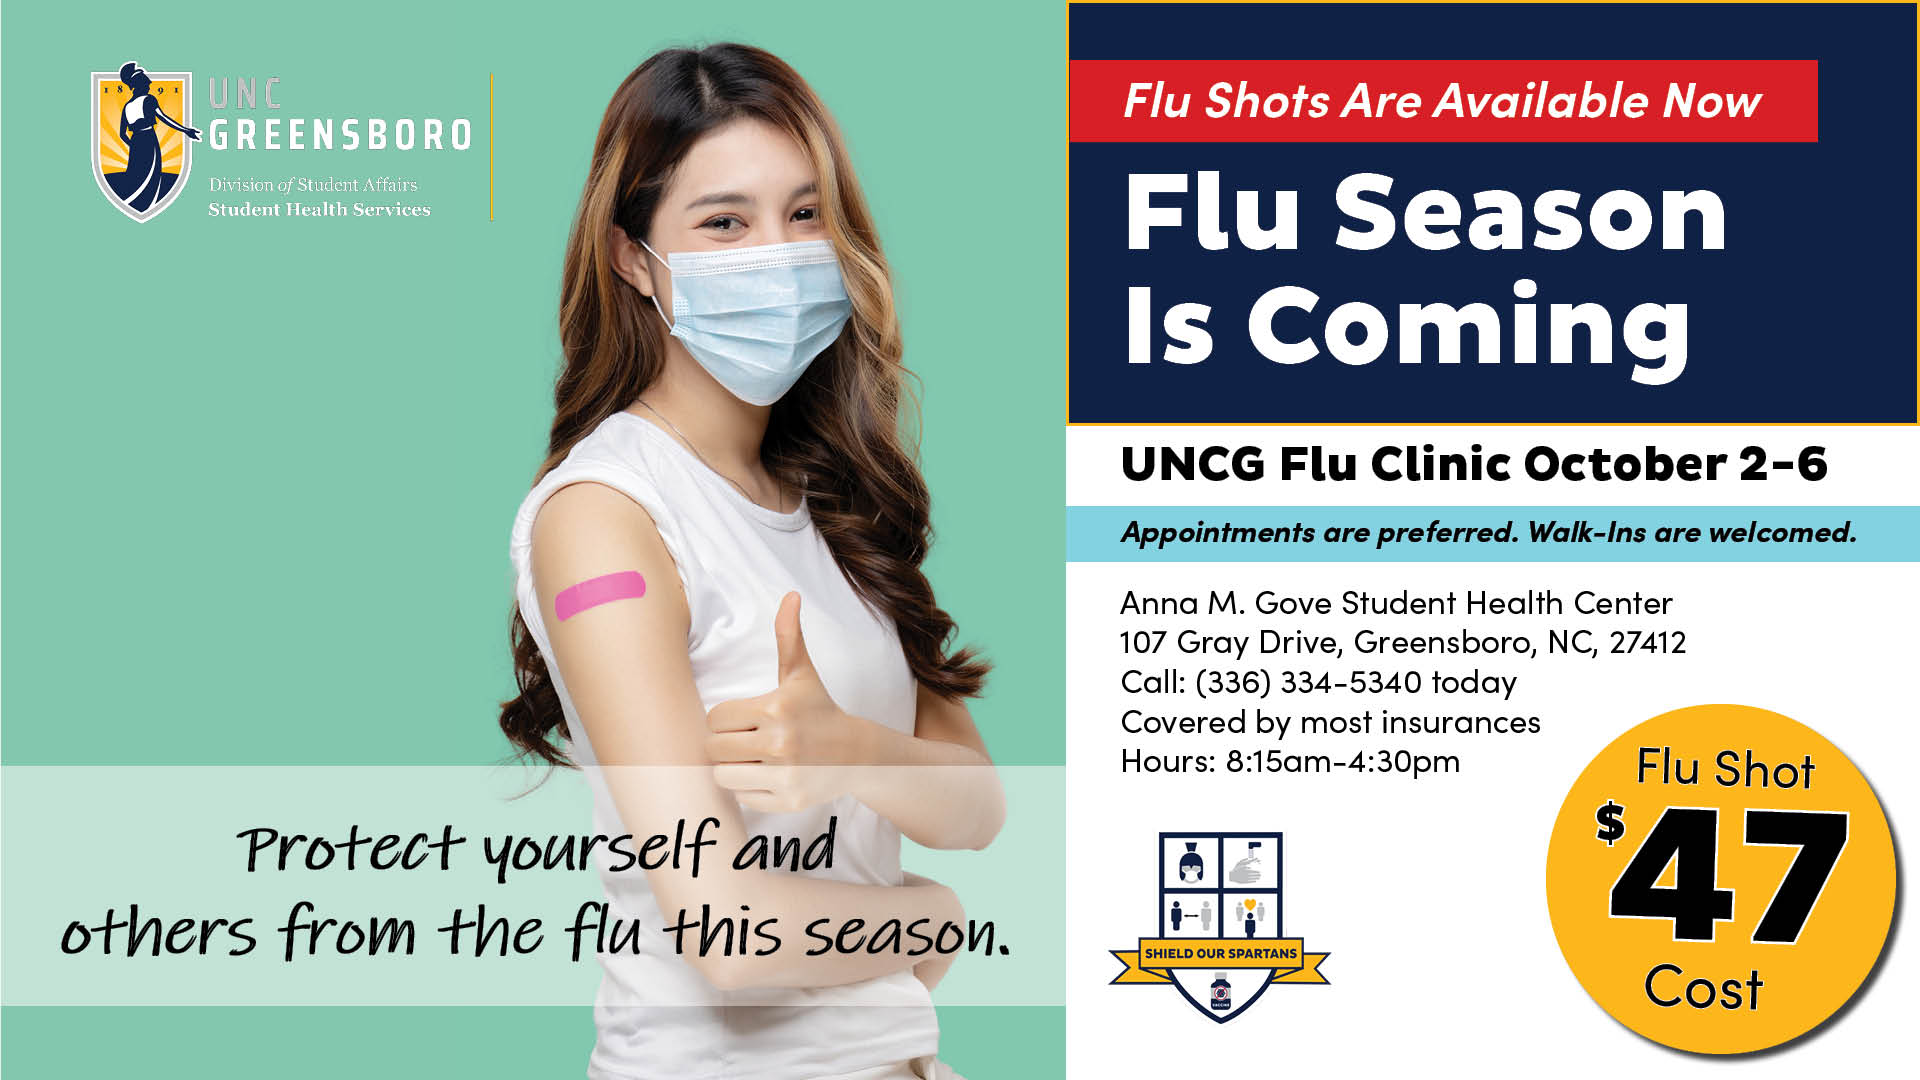 Poster of a woman with a bandage on her arm promotes flu shots. It reads: "UNCG Flu Clinic October 2-6. Anna M. Gove Student Health Center. Call 336-334-5340 today. Hours: 8:15 a.m. to 4:30 p.m.